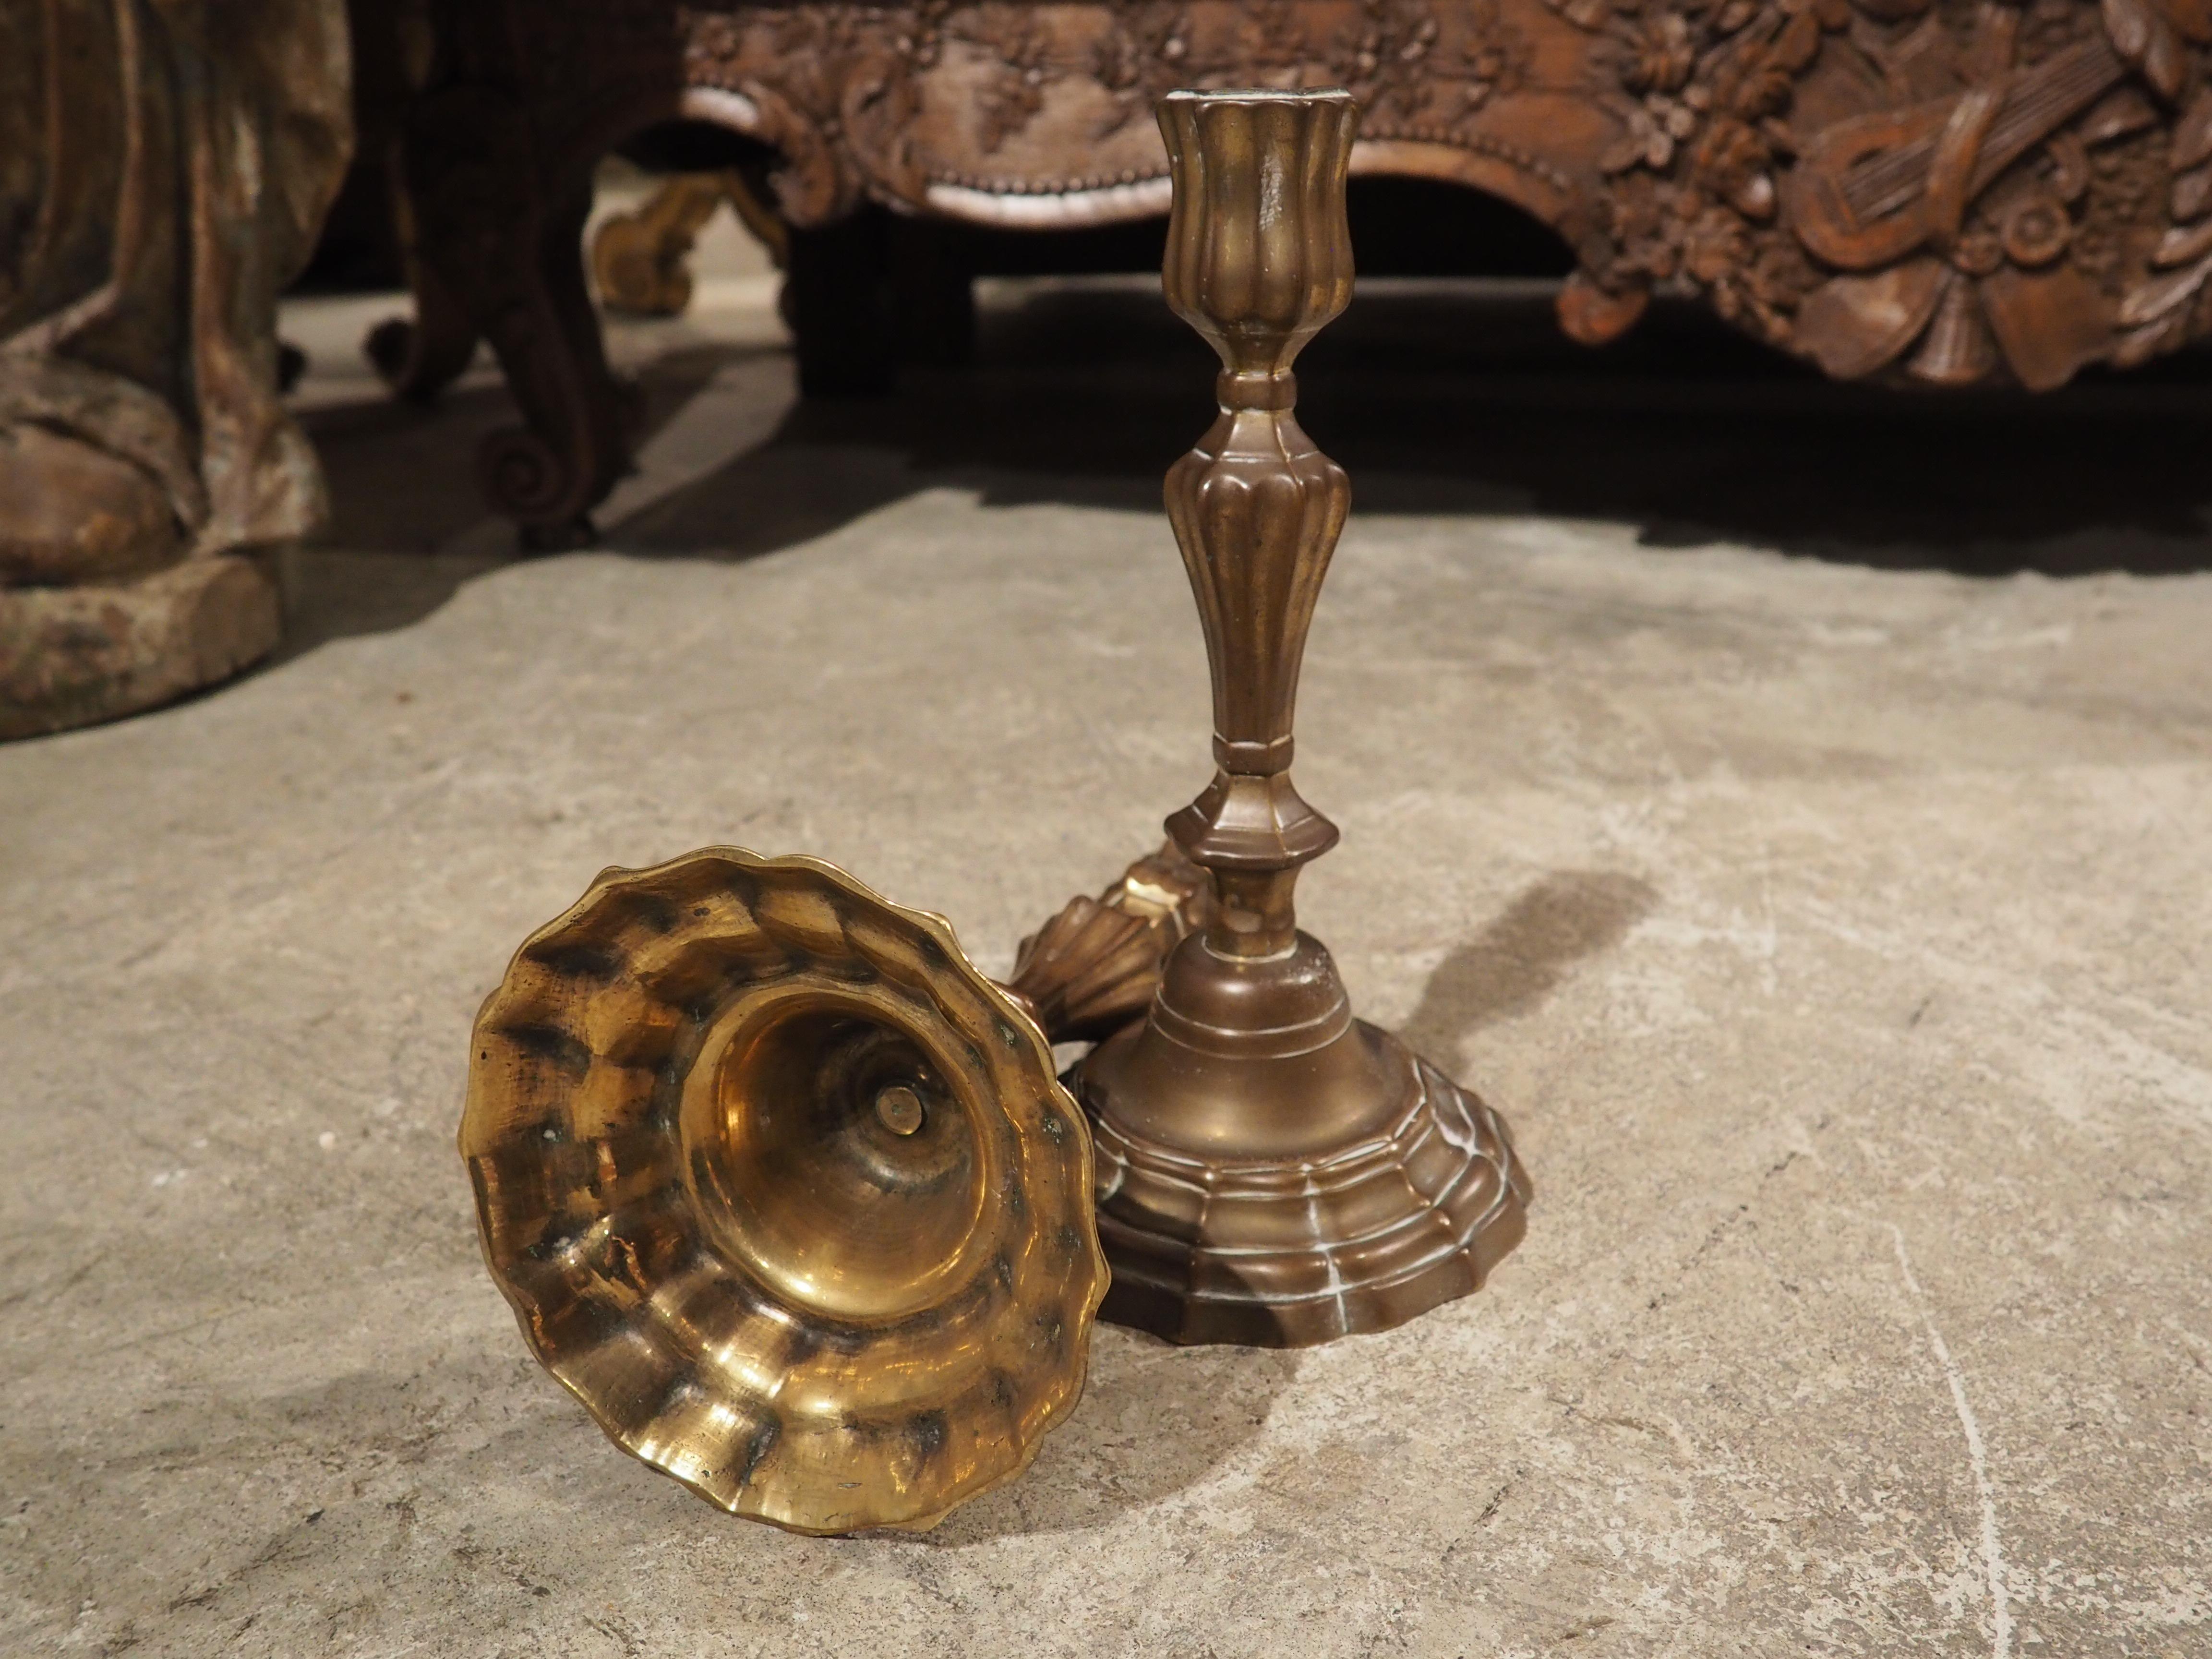 Cast in France during the 1700s, this pair of bronze candlesticks has a lovely patination, giving them a glossy brown color. The highly contoured and curved bases are mirrored by the recessed lobes that embellish the shafts and capitals that are